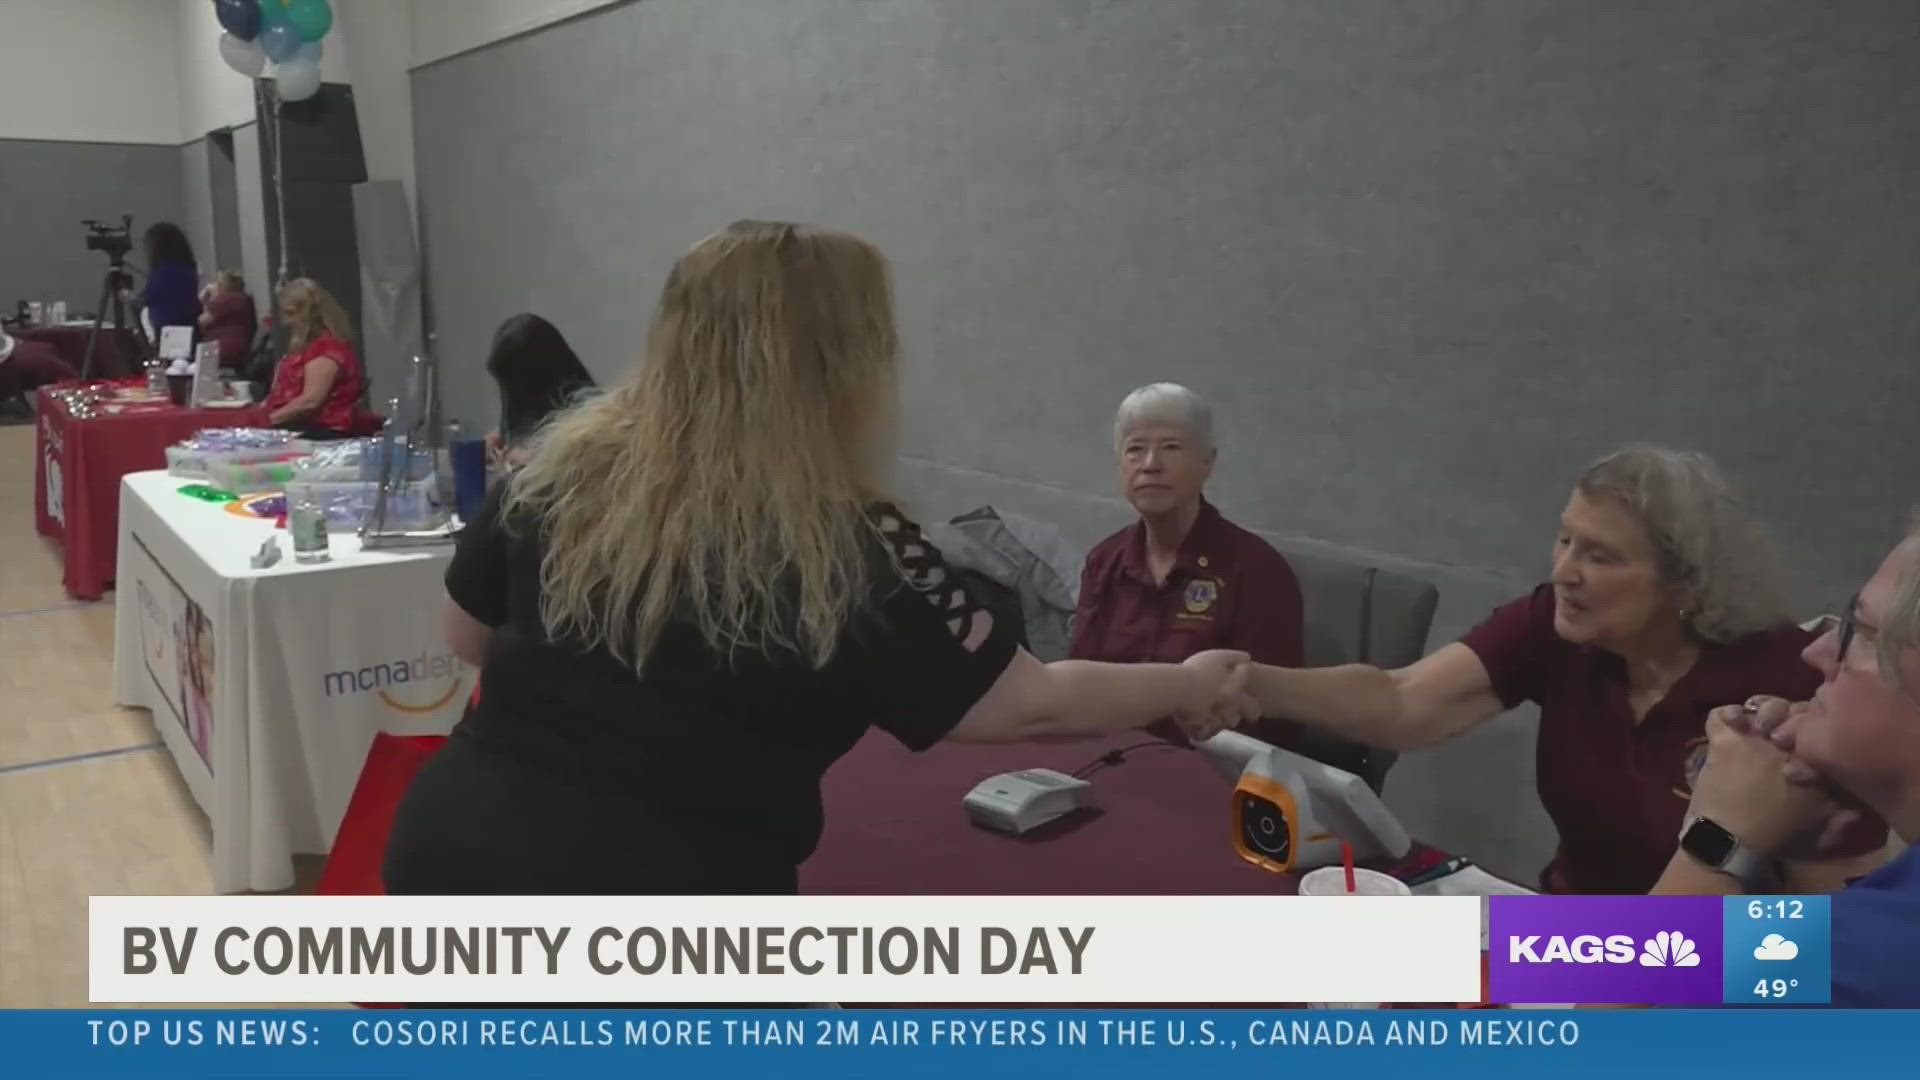 Over 40 organizations attended the first Brazos Valley Community Connection Day at the First Baptist Church in Bryan to offer a wide range of services to residents.